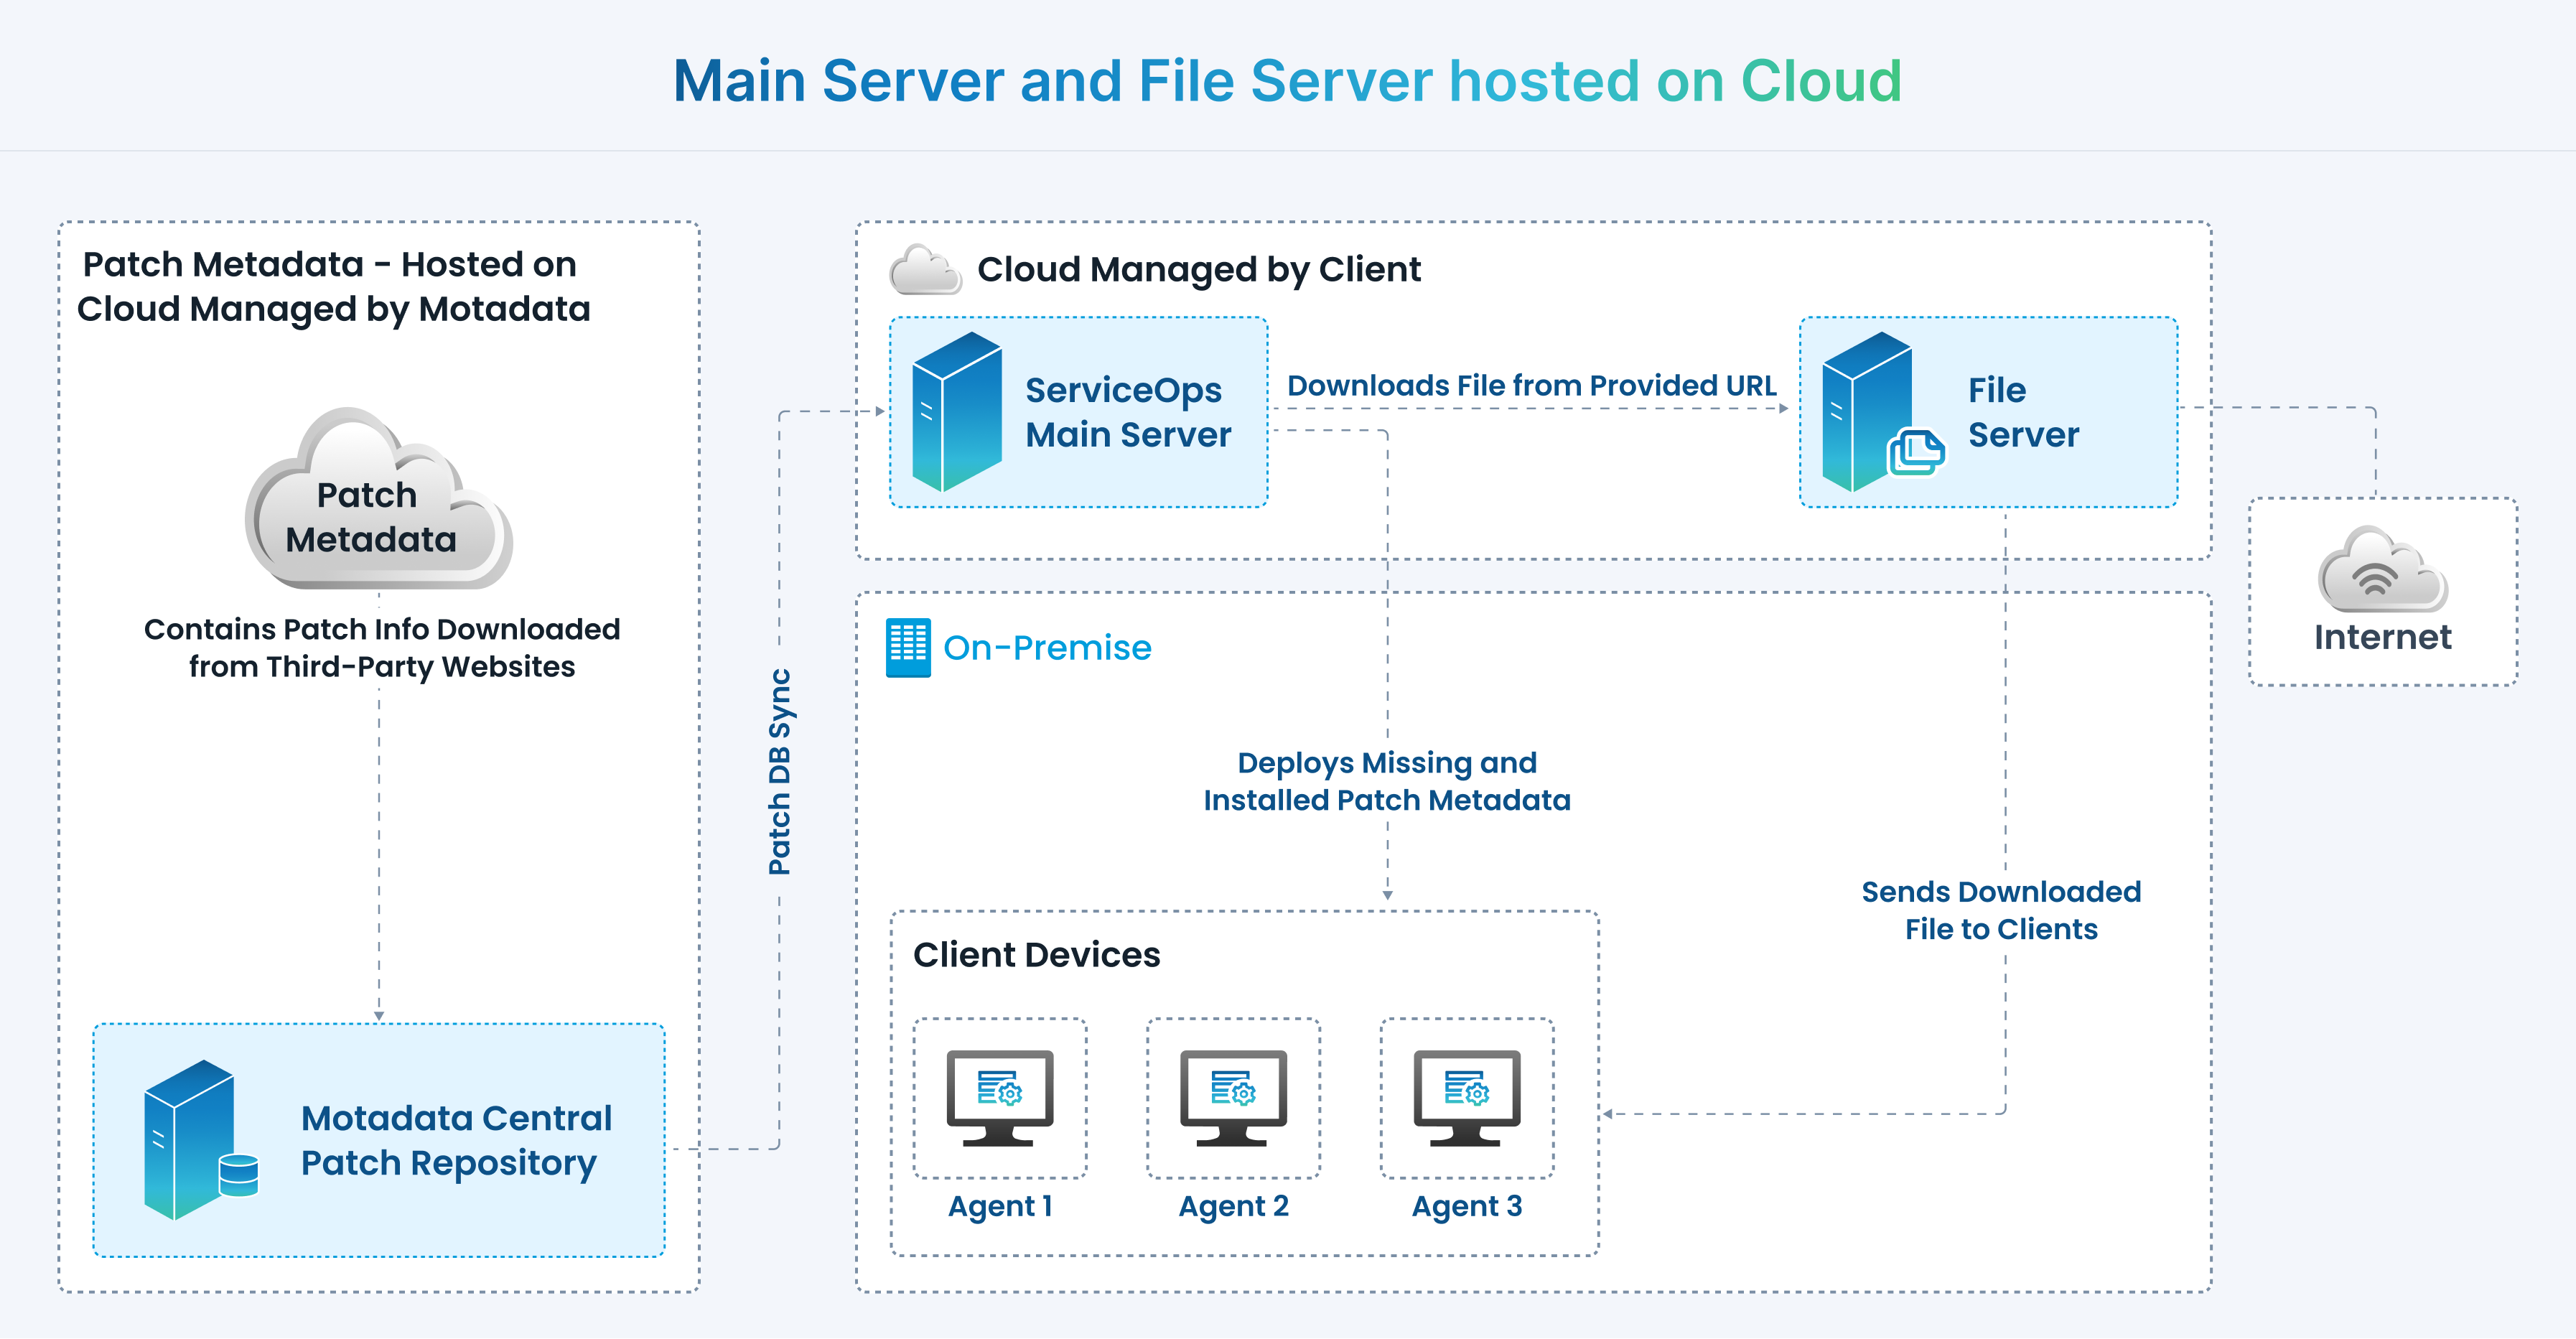 Main Server and File Server hosted on Cloud